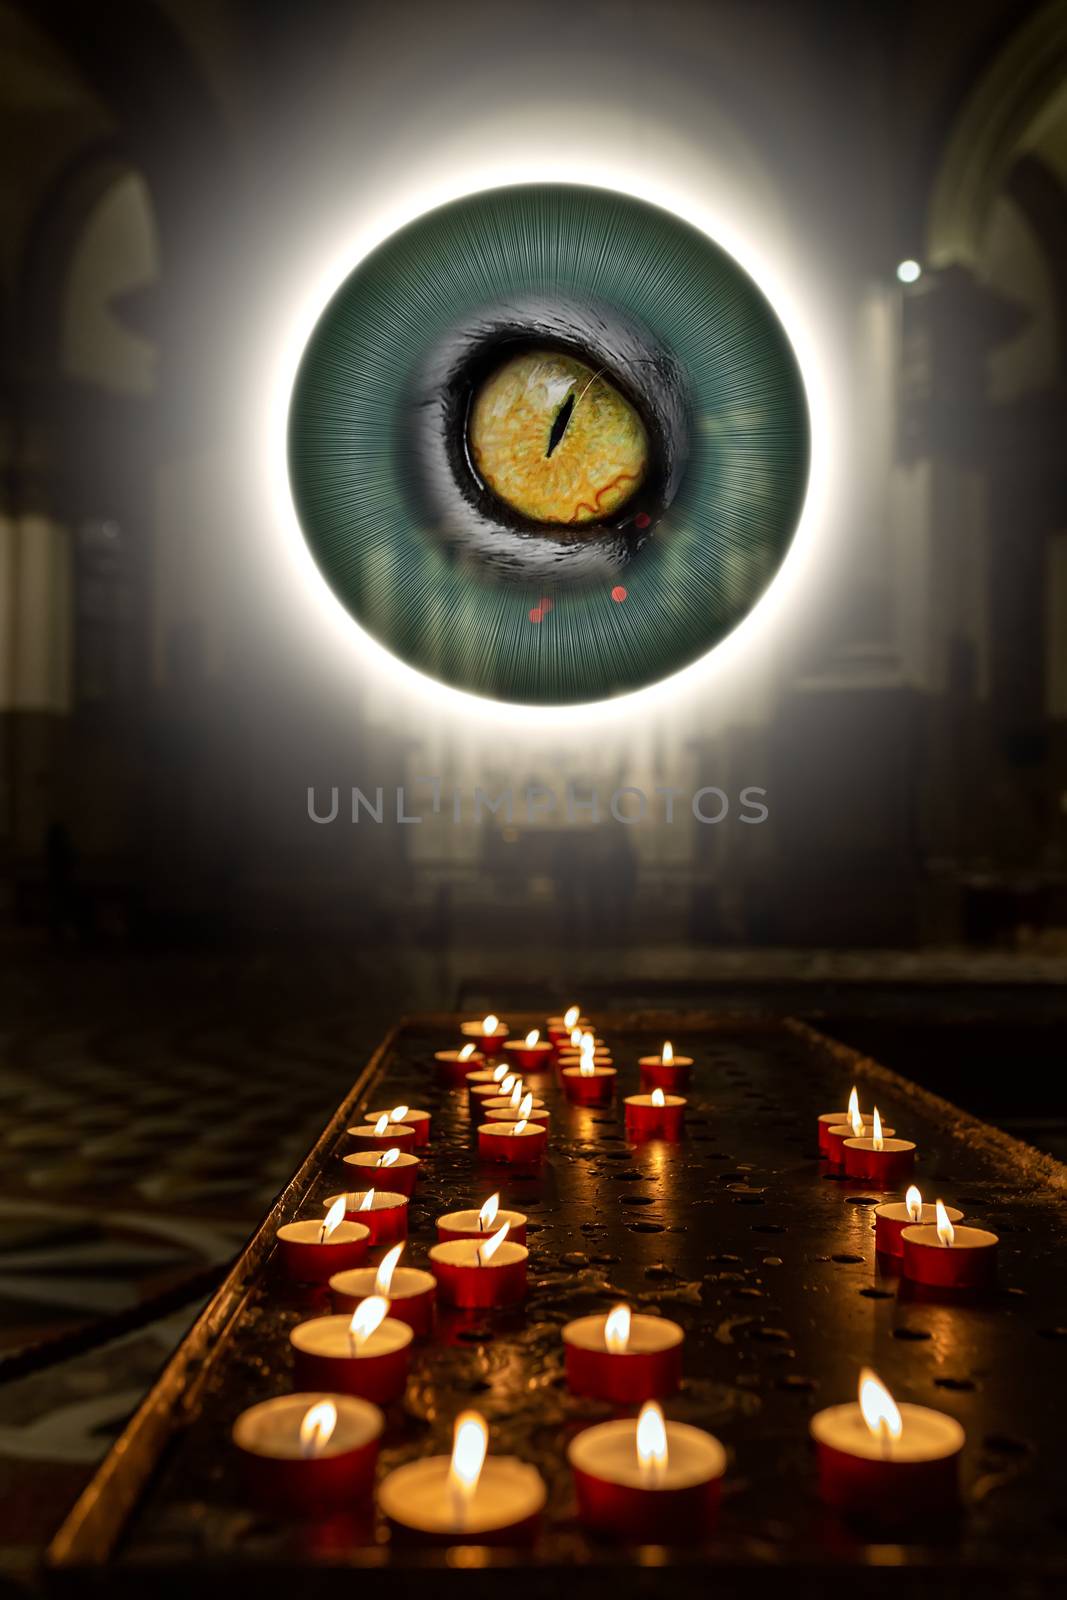 The concept of occultism astrology magic. Candles are burning in a dark church. A magical circle shines above with an eye inside from which rays of light emanate.